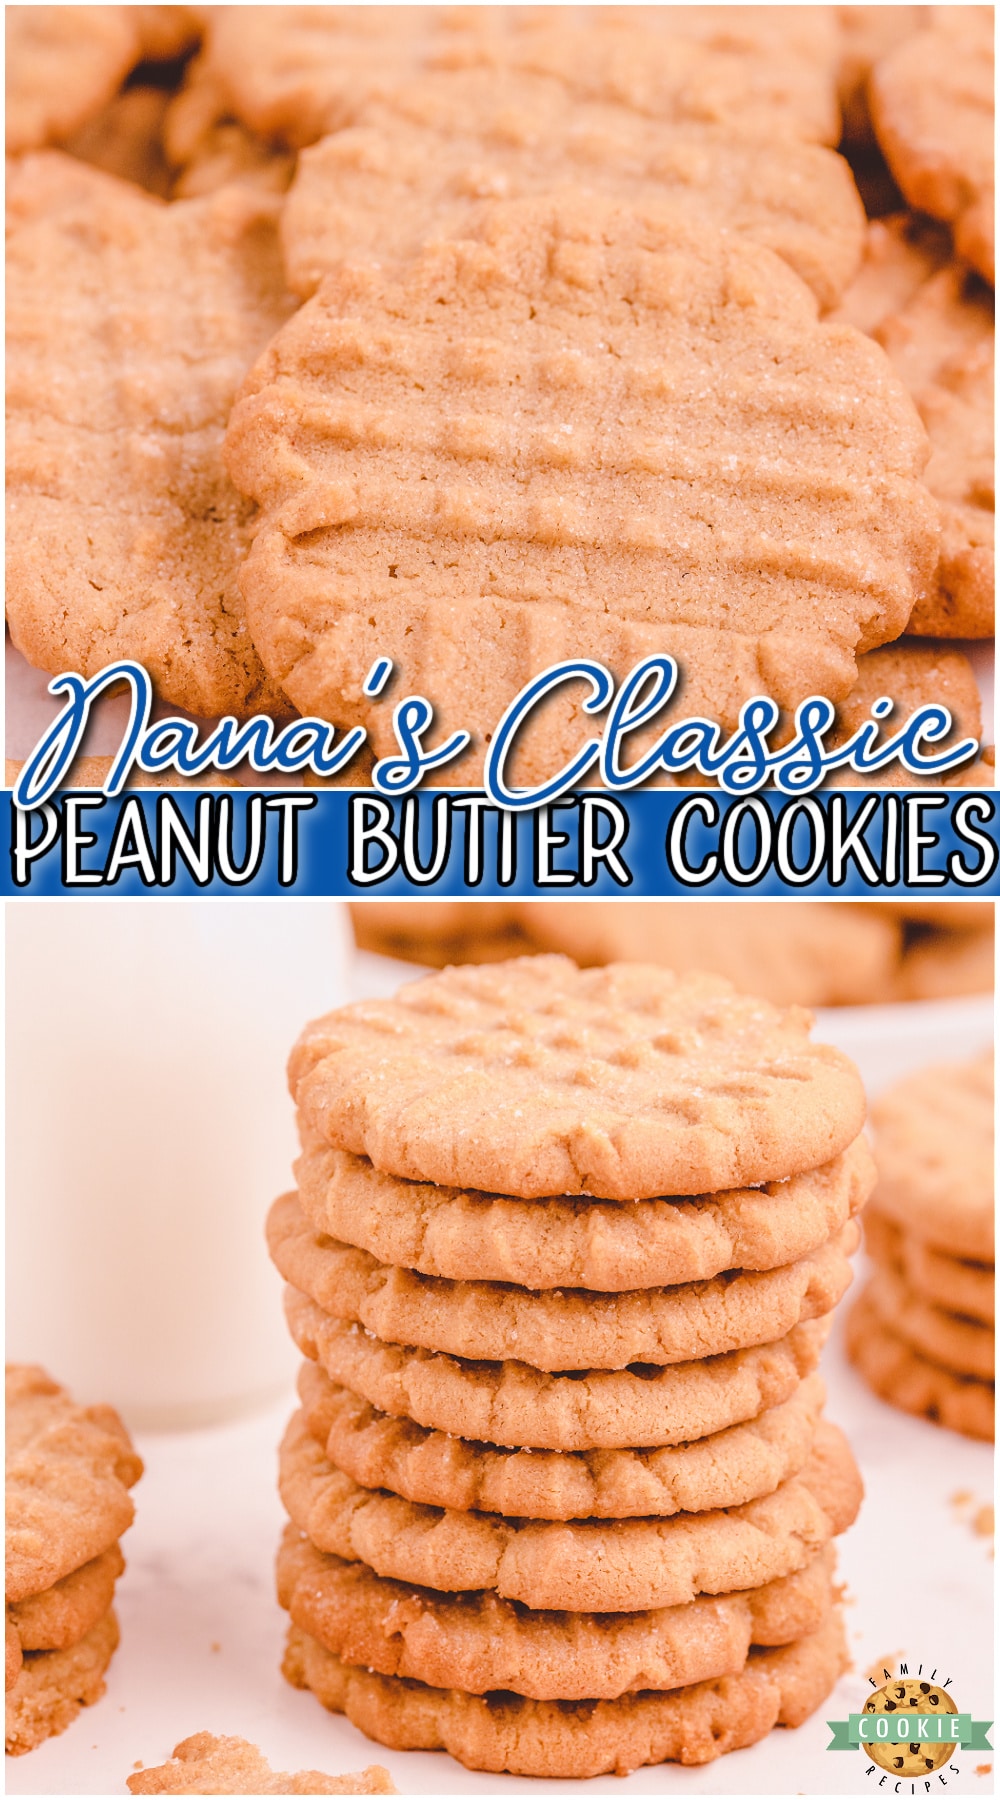 Nothing beats Grandma's peanut butter cookies and this recipe is sure to make you feel nostalgic! Simple old fashioned peanut butter cookies made with classic ingredients like butter, peanut butter, sugar, eggs & flour. 